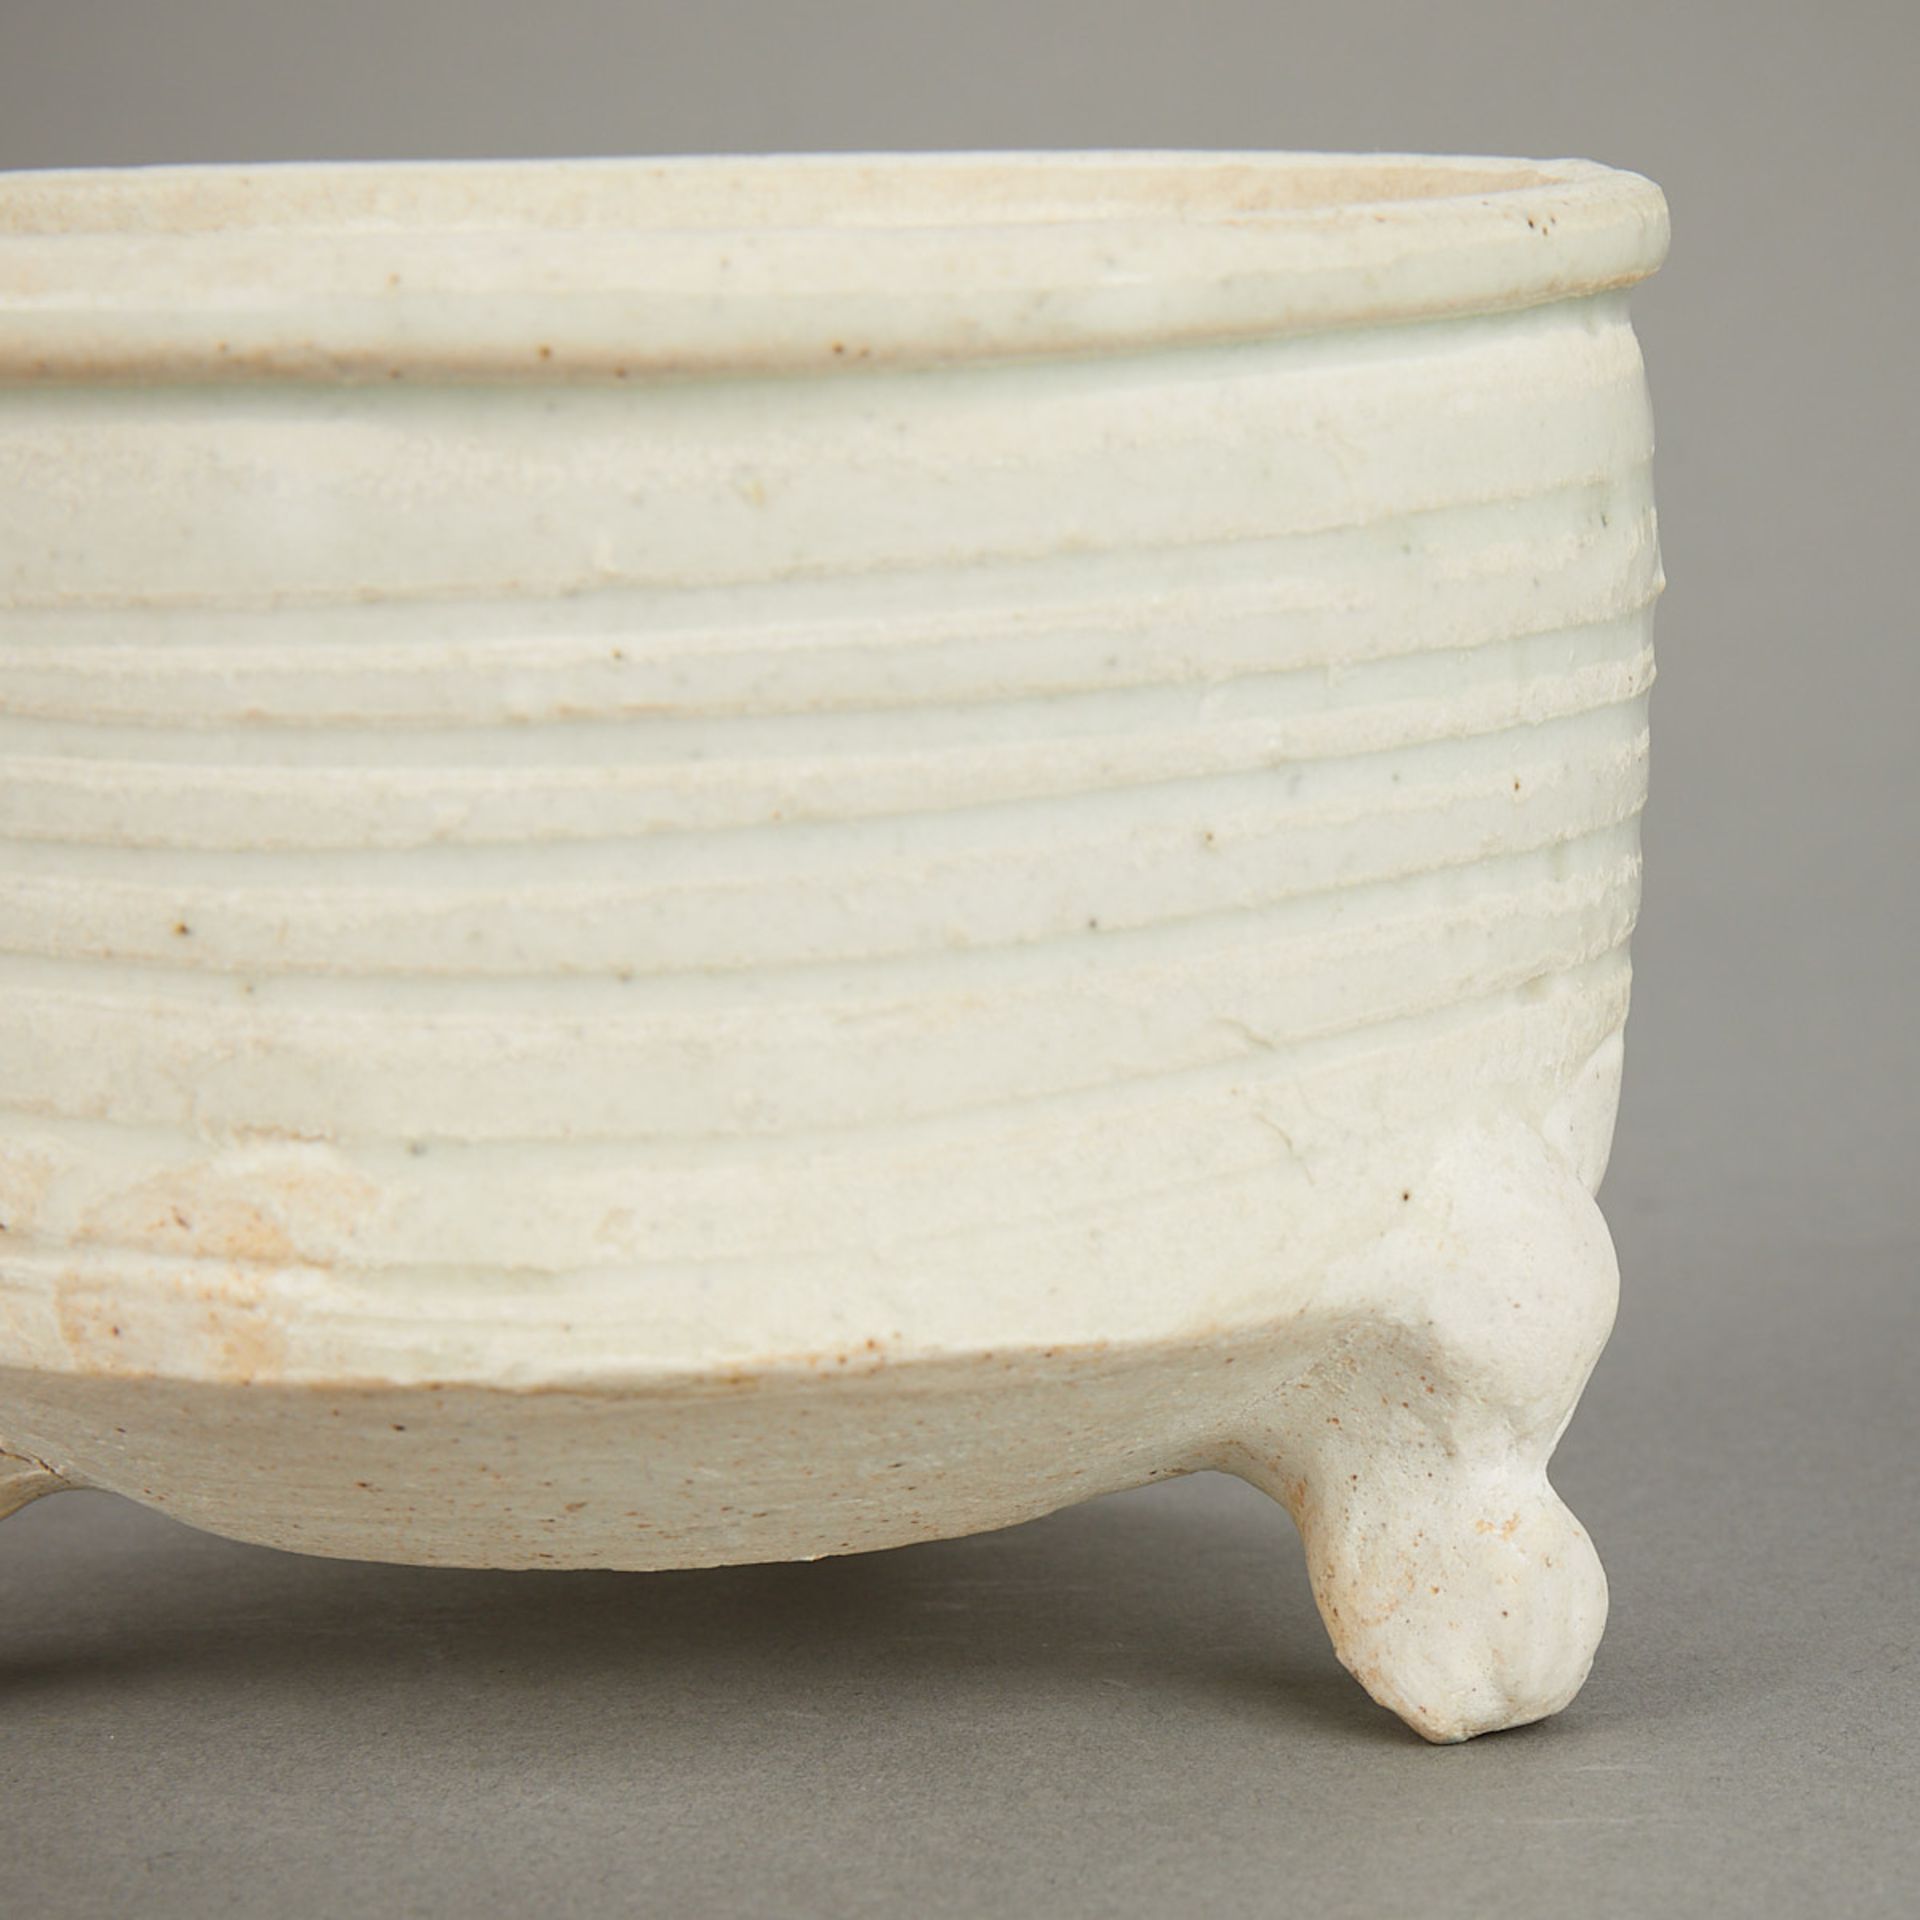 Chinese Song Ceramic Tripod Censer - Image 8 of 8